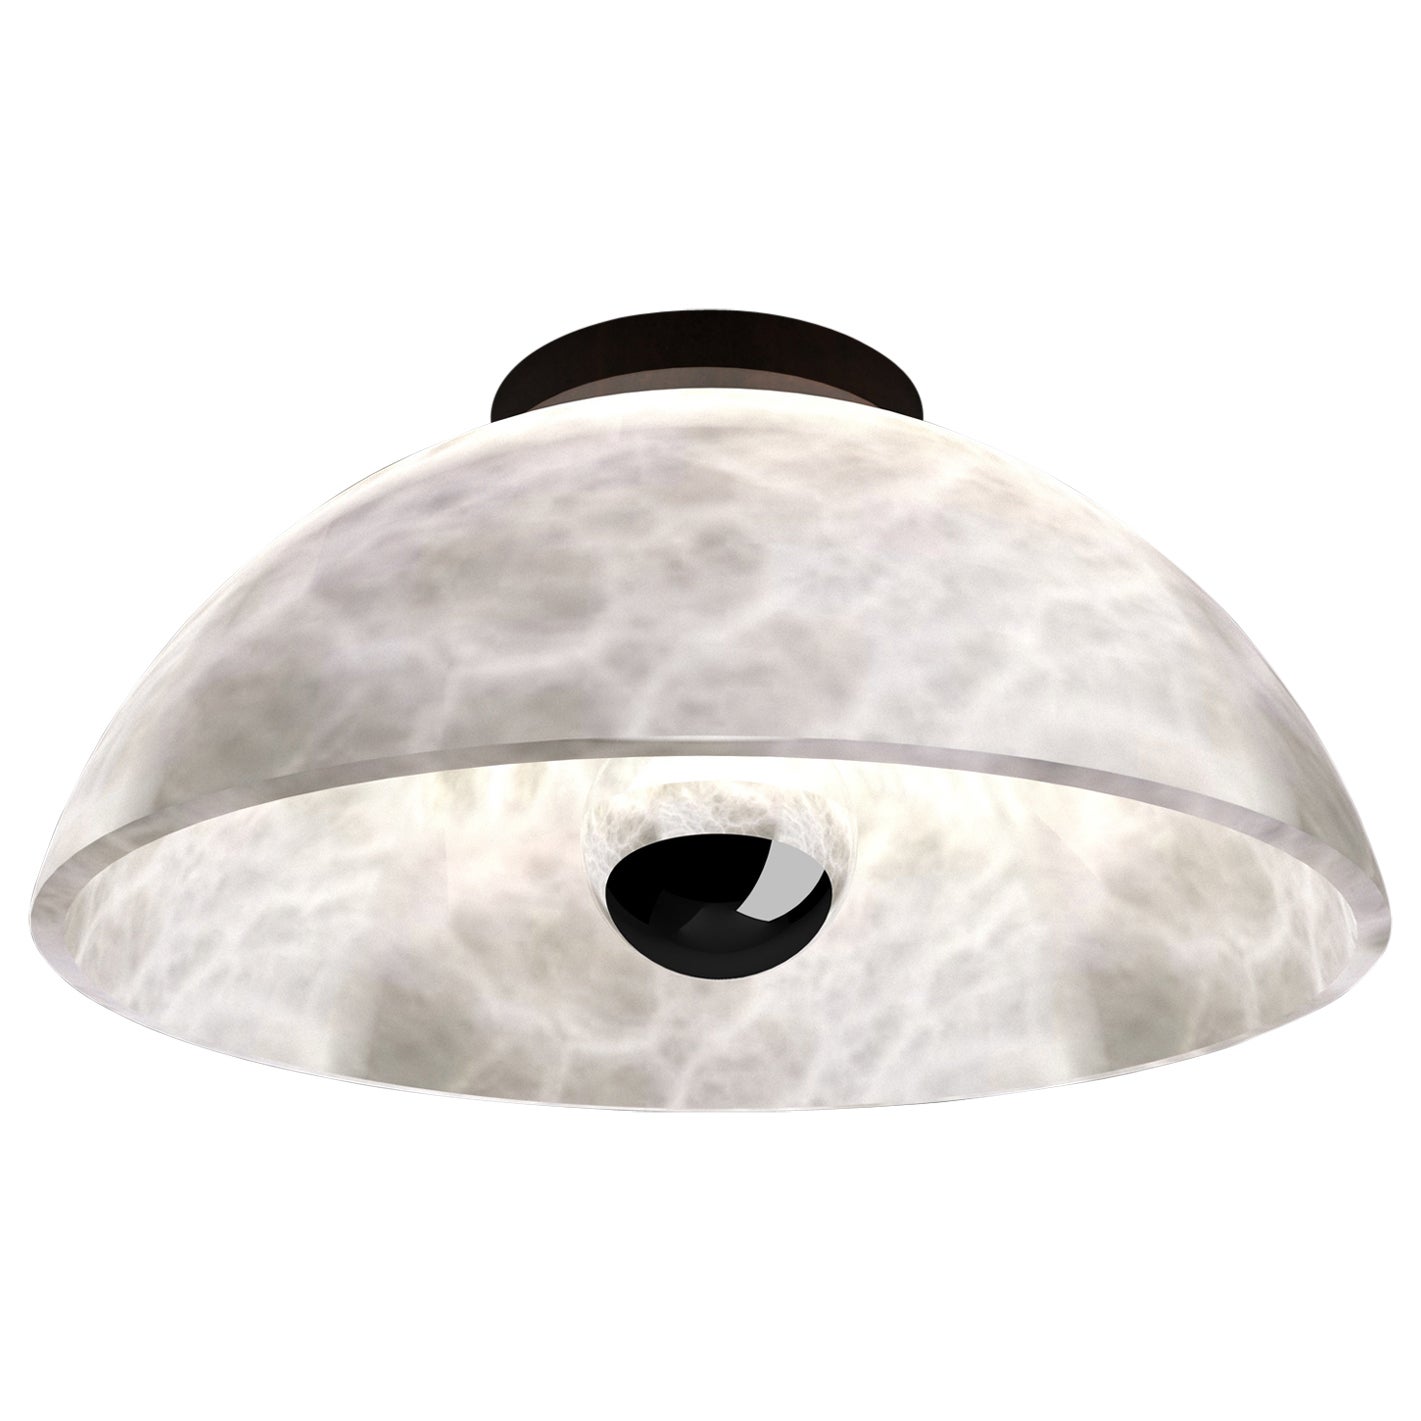 Apollo Ruggine Of Florence Metal Ceiling Lamp by Alabastro Italiano For Sale